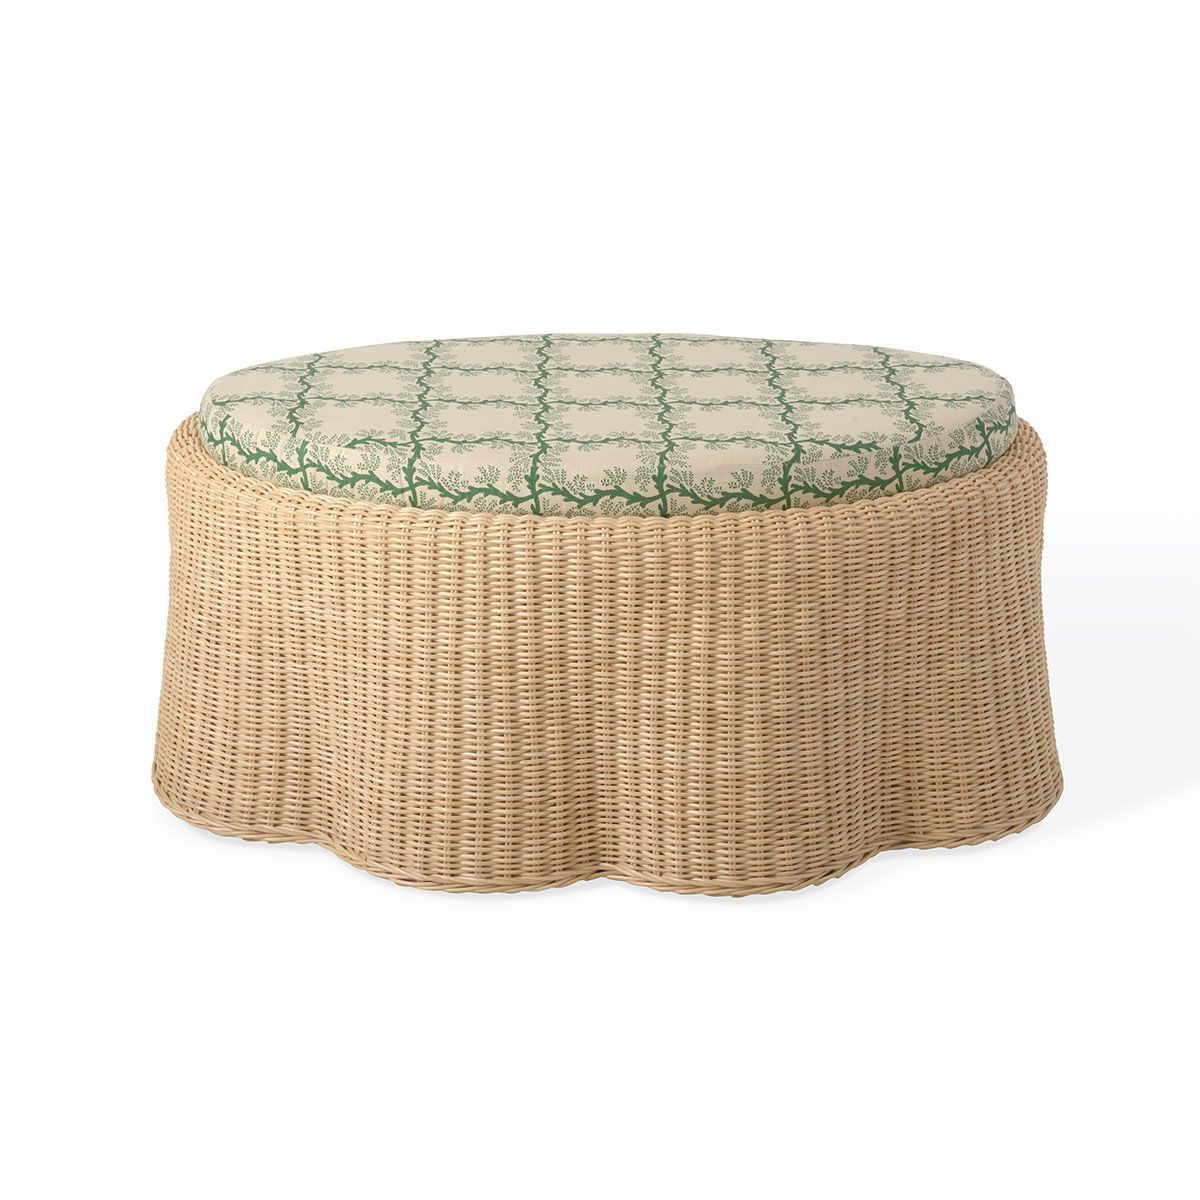 Ottoman Cushion, Hand Weaving Throughout Popular Traditional Hand Woven Pouf Ottomans (View 1 of 10)